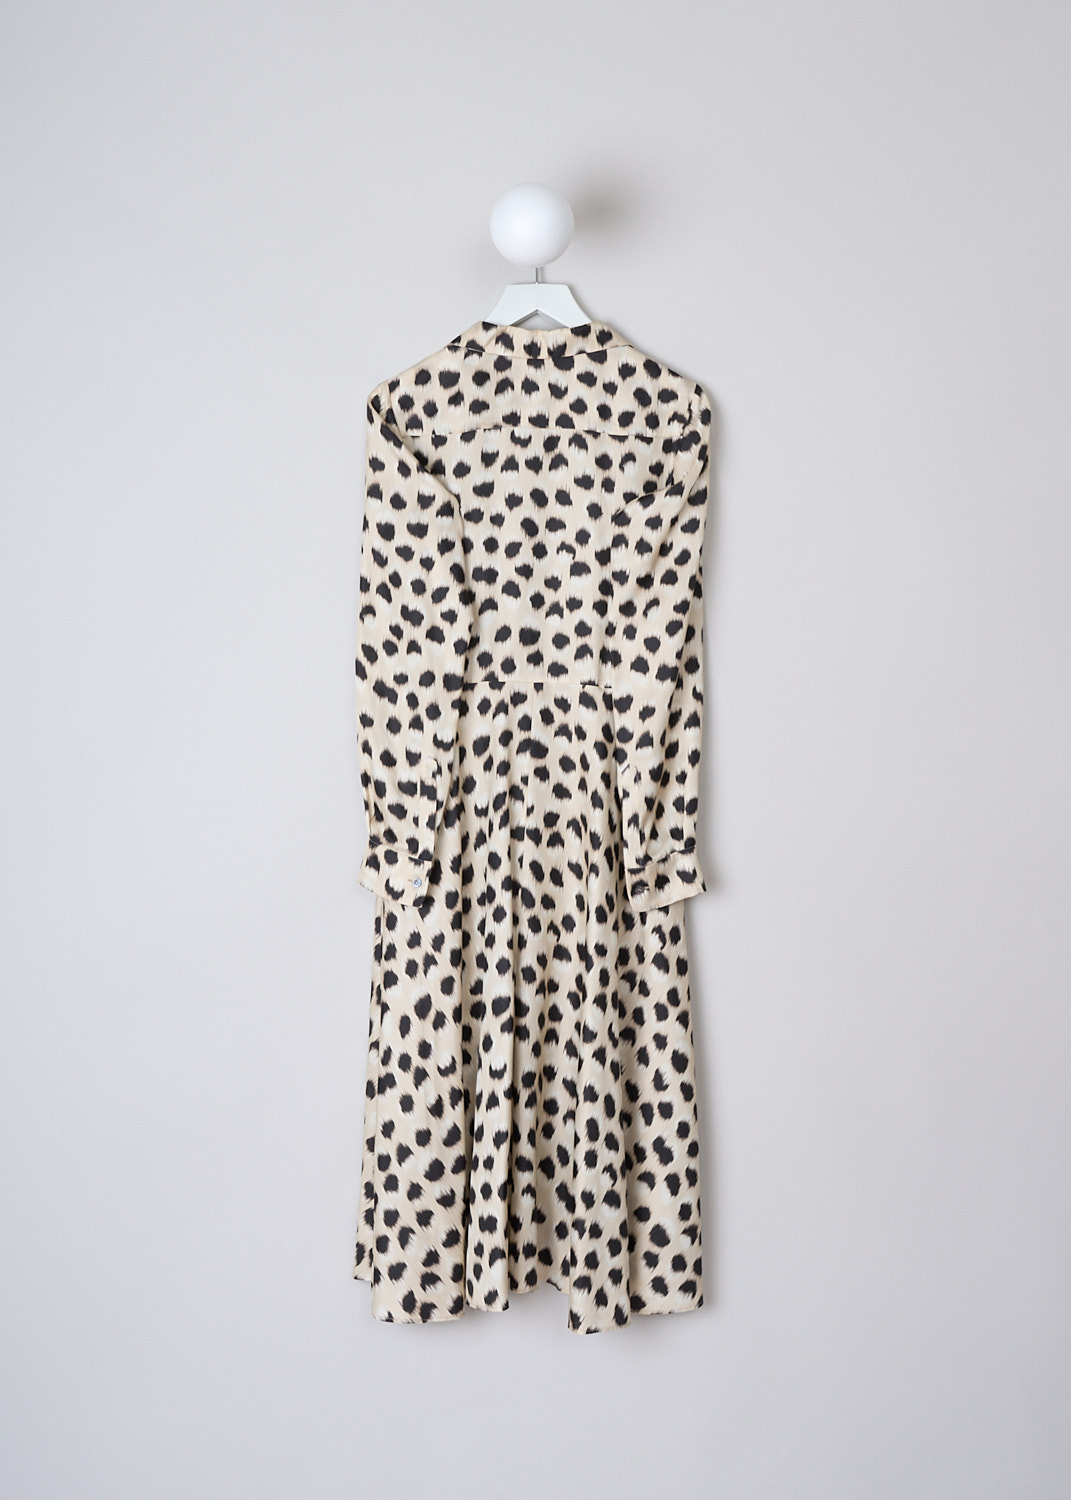 ASPESI, LONG SLEEVE MIDI DRESS WITH FADED ANIMAL PRINT, 2990_V592_60113, Beige, Print, Black, Back, This beige midi shirt dress with faded animal print has a cutaway-collar with a V-neckline and a front button closure. The long sleeves have buttoned cuffs. Slanted pockets are concealed in the side seams. The dress has a more fitted bodice with a flared skirt.
